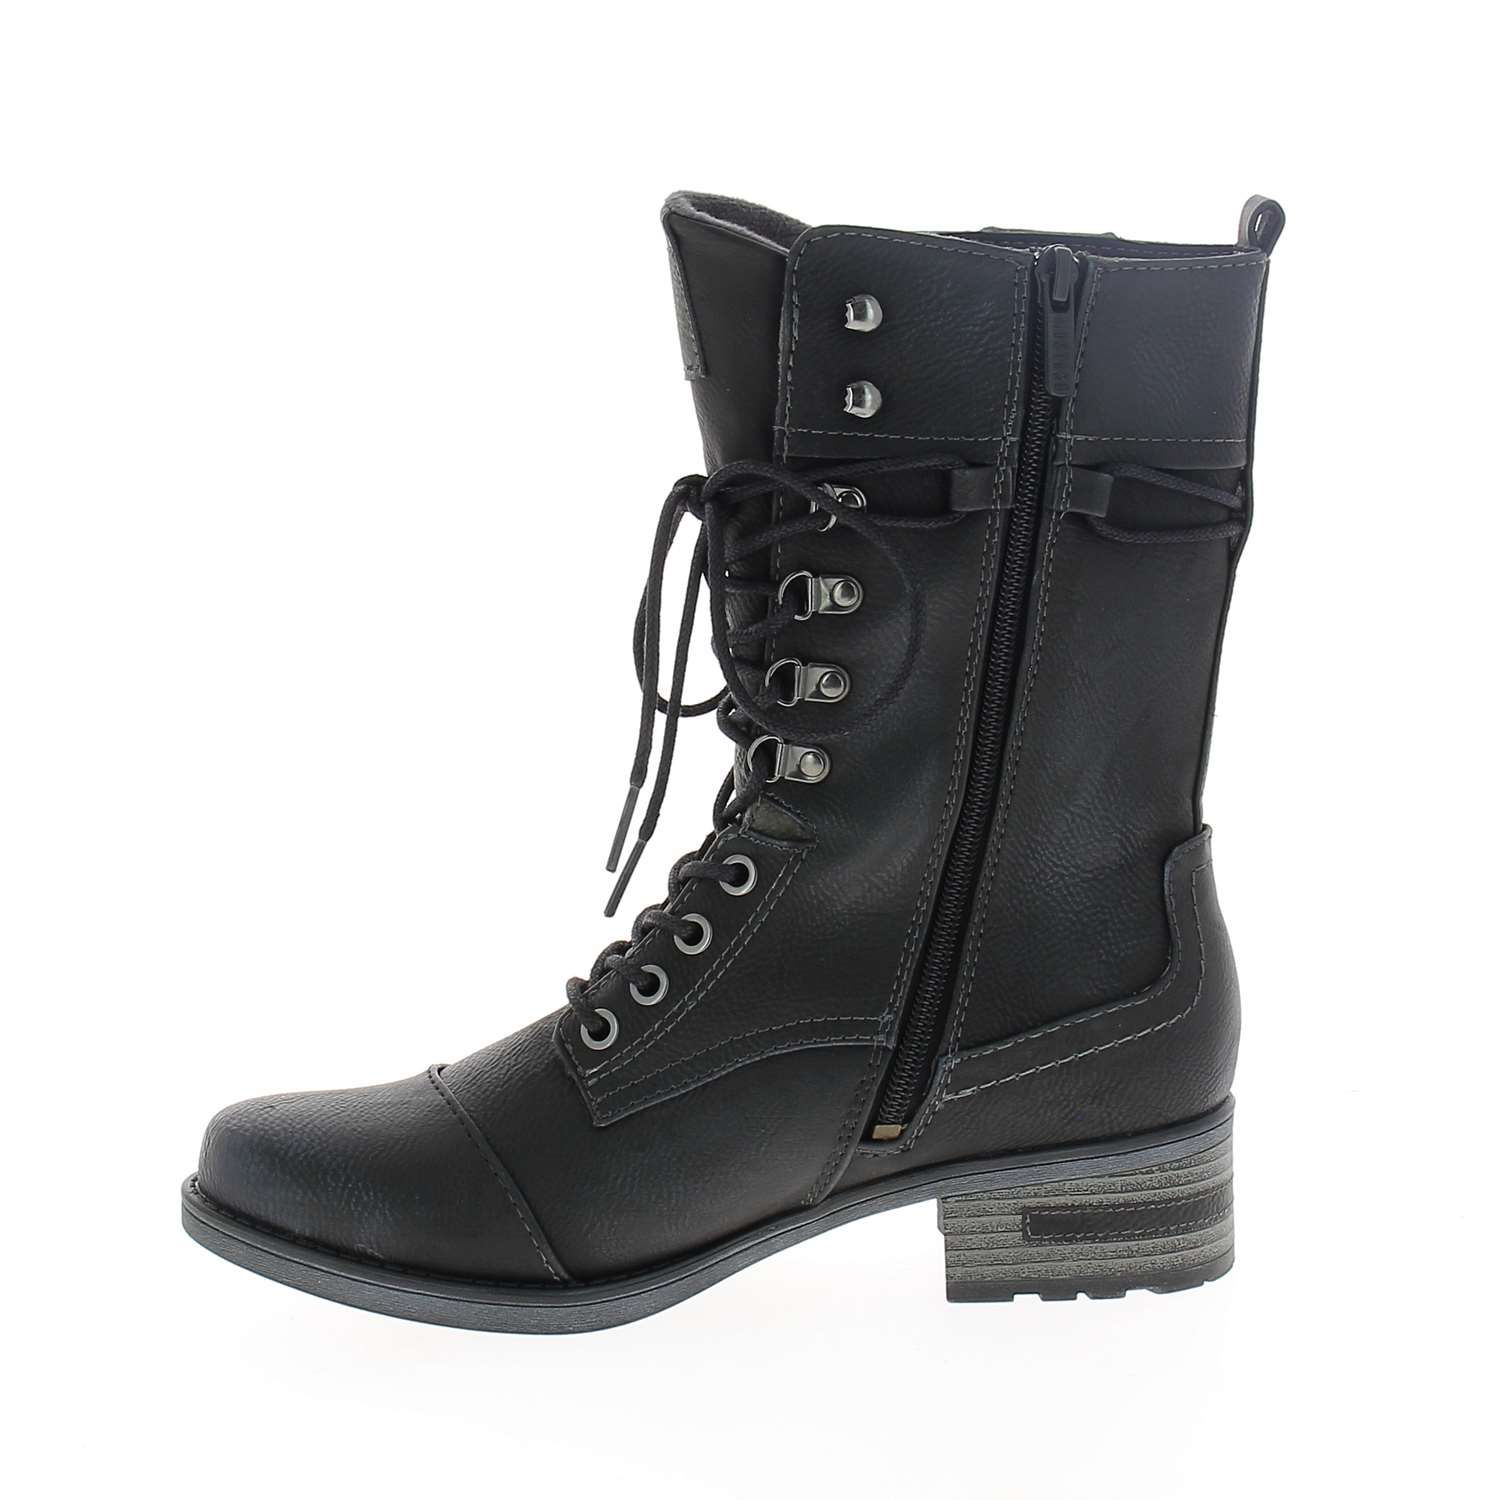 05 - MULYTE - MUSTANG - Boots et bottines - Synthétique